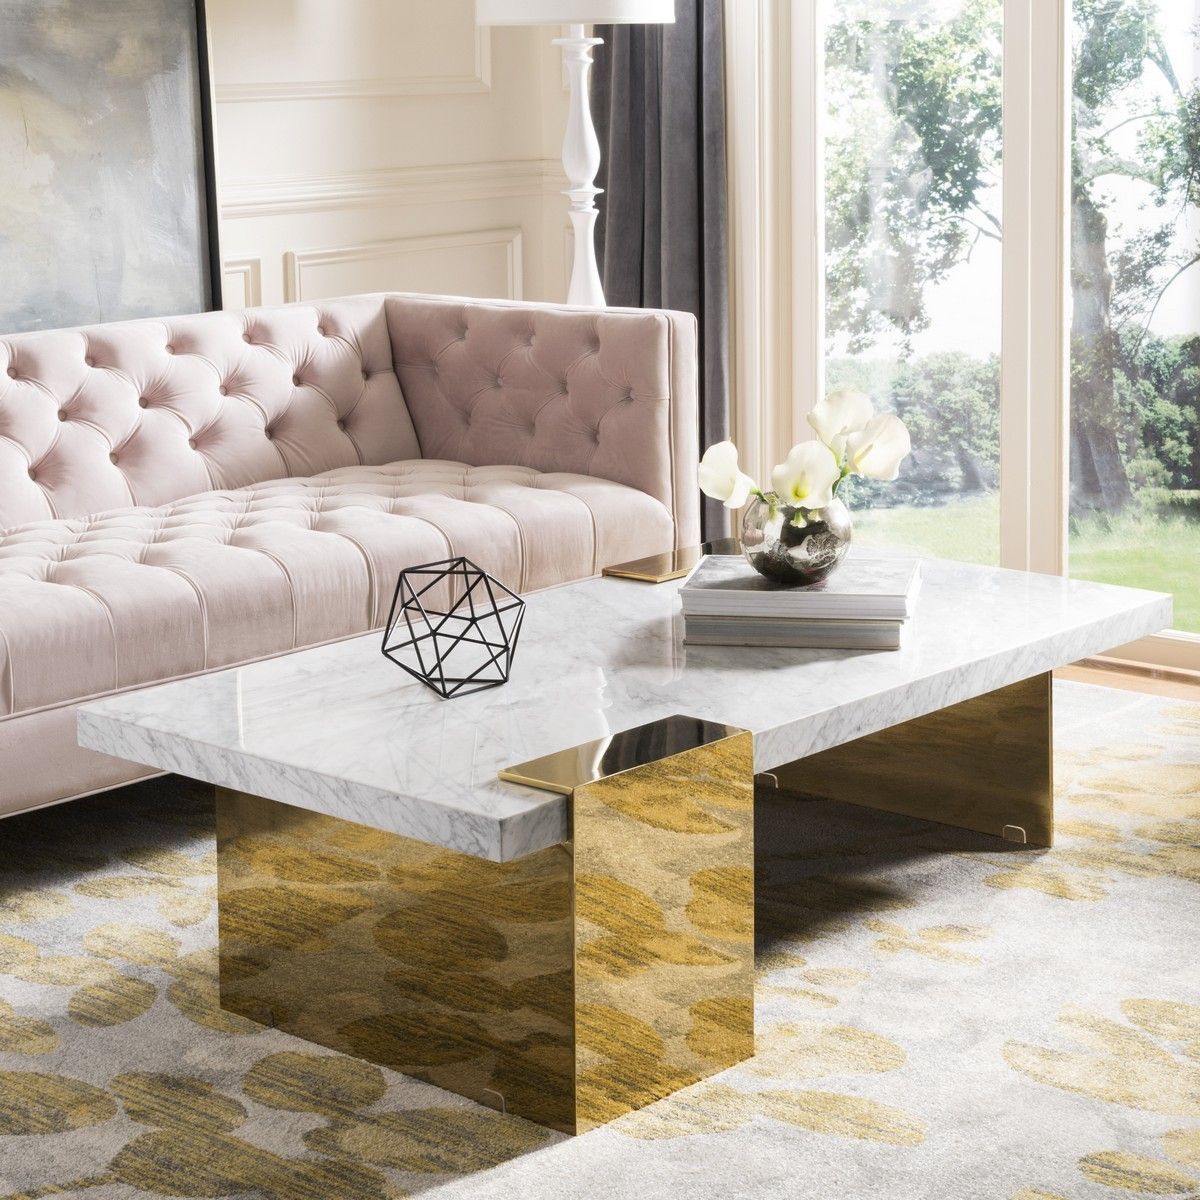 Sfv3541a 2bx – Safavieh | Marble Coffee Table, Faux Marble Coffee Table Pertaining To Waterproof Coffee Tables (Gallery 13 of 21)